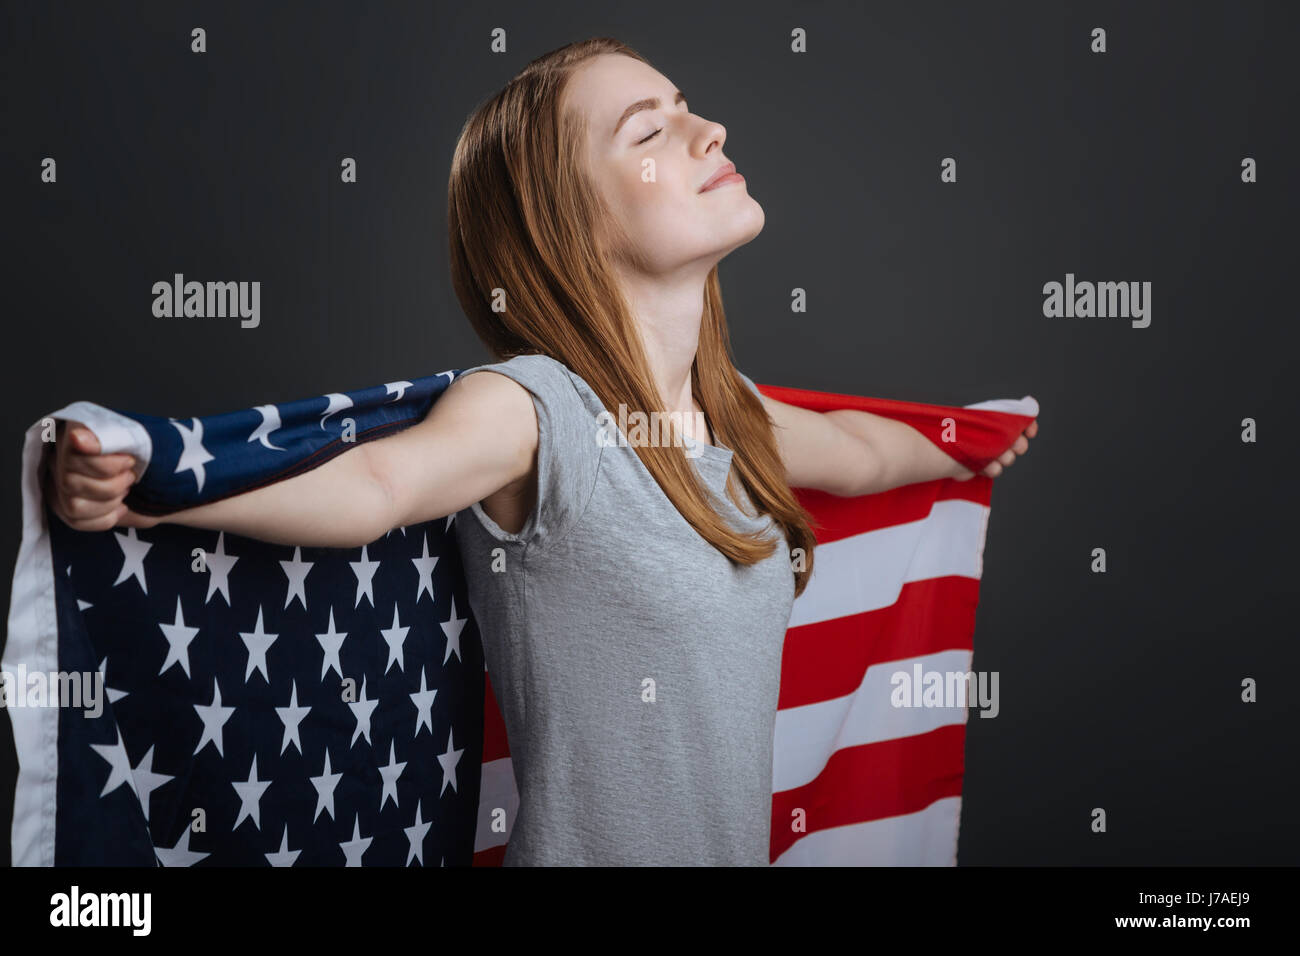 Inspired sweet girl being a real patriot Stock Photo